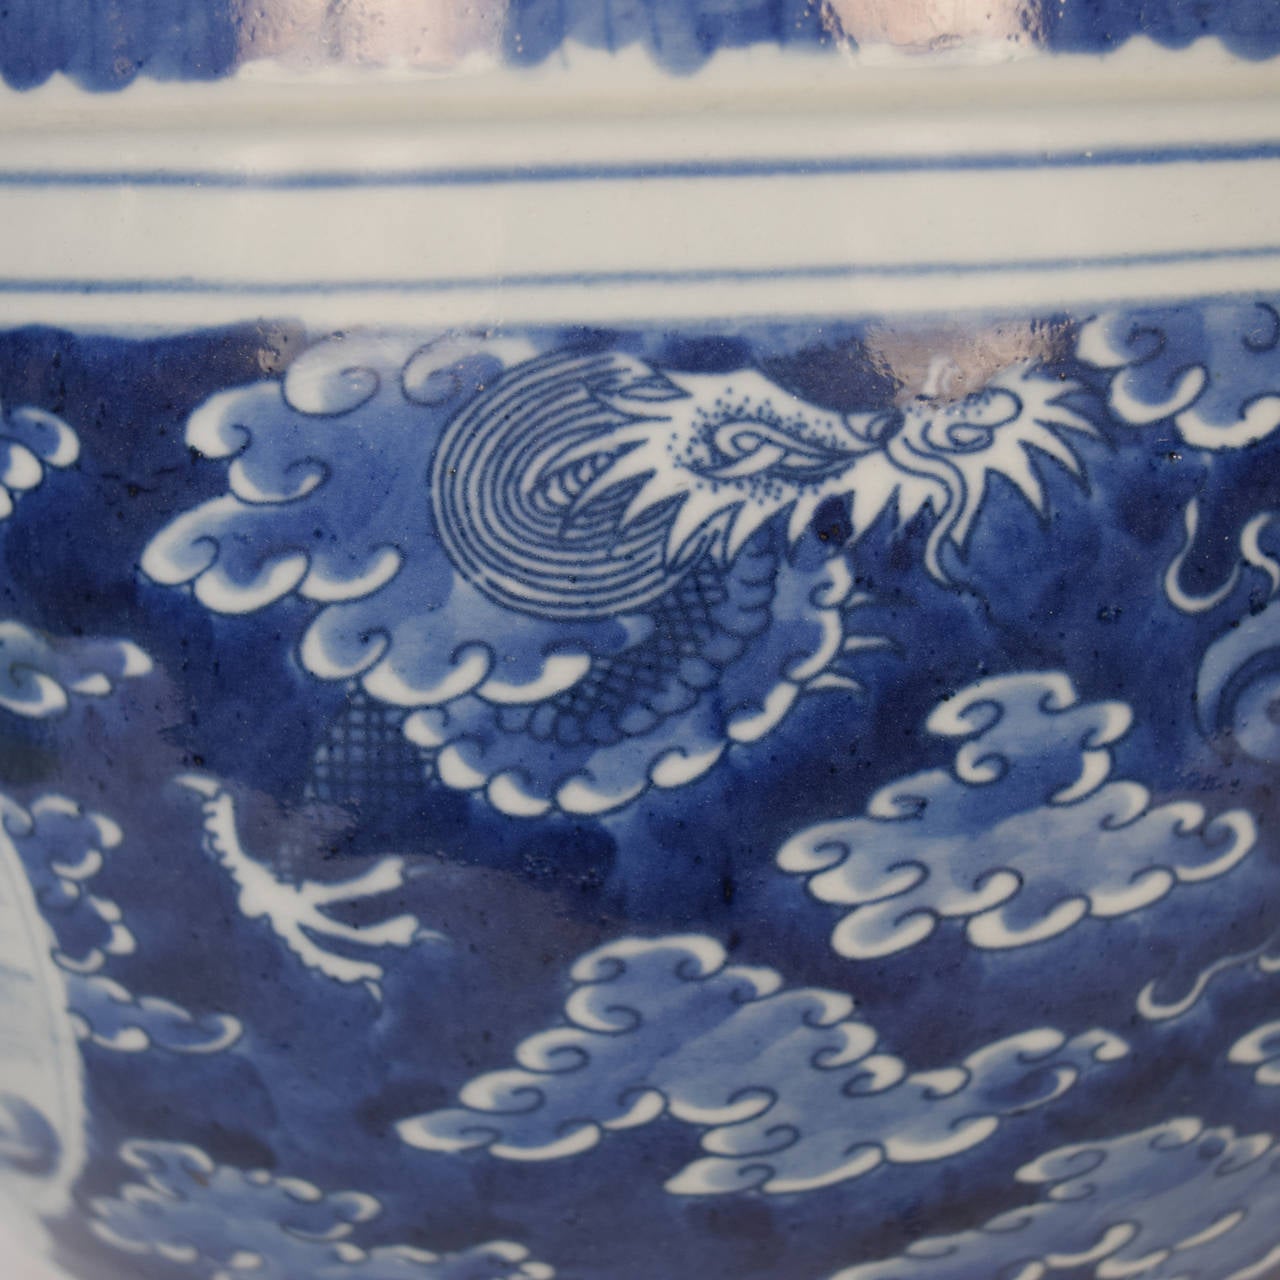 Ceramic Chinese Blue and White Bowl with Landscape Scene and Dragons Amongst Clouds